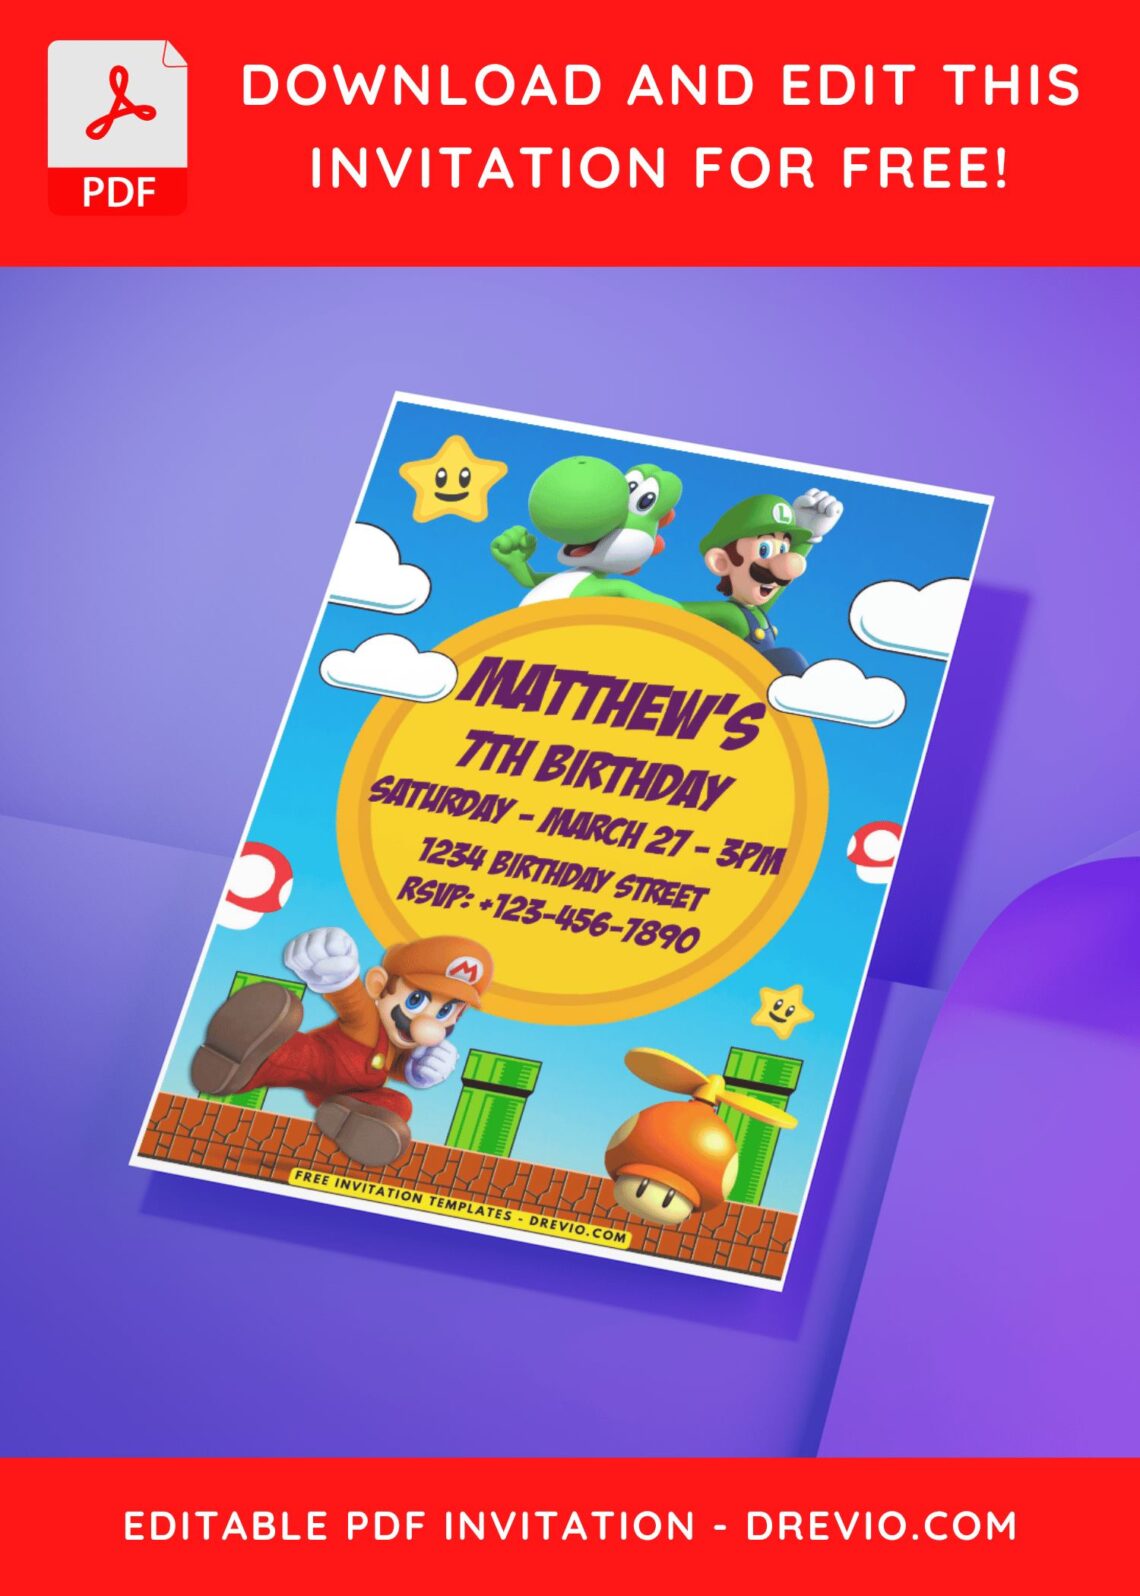 Super Mario Invitation Template Guide: Free Designs For Your Party! H